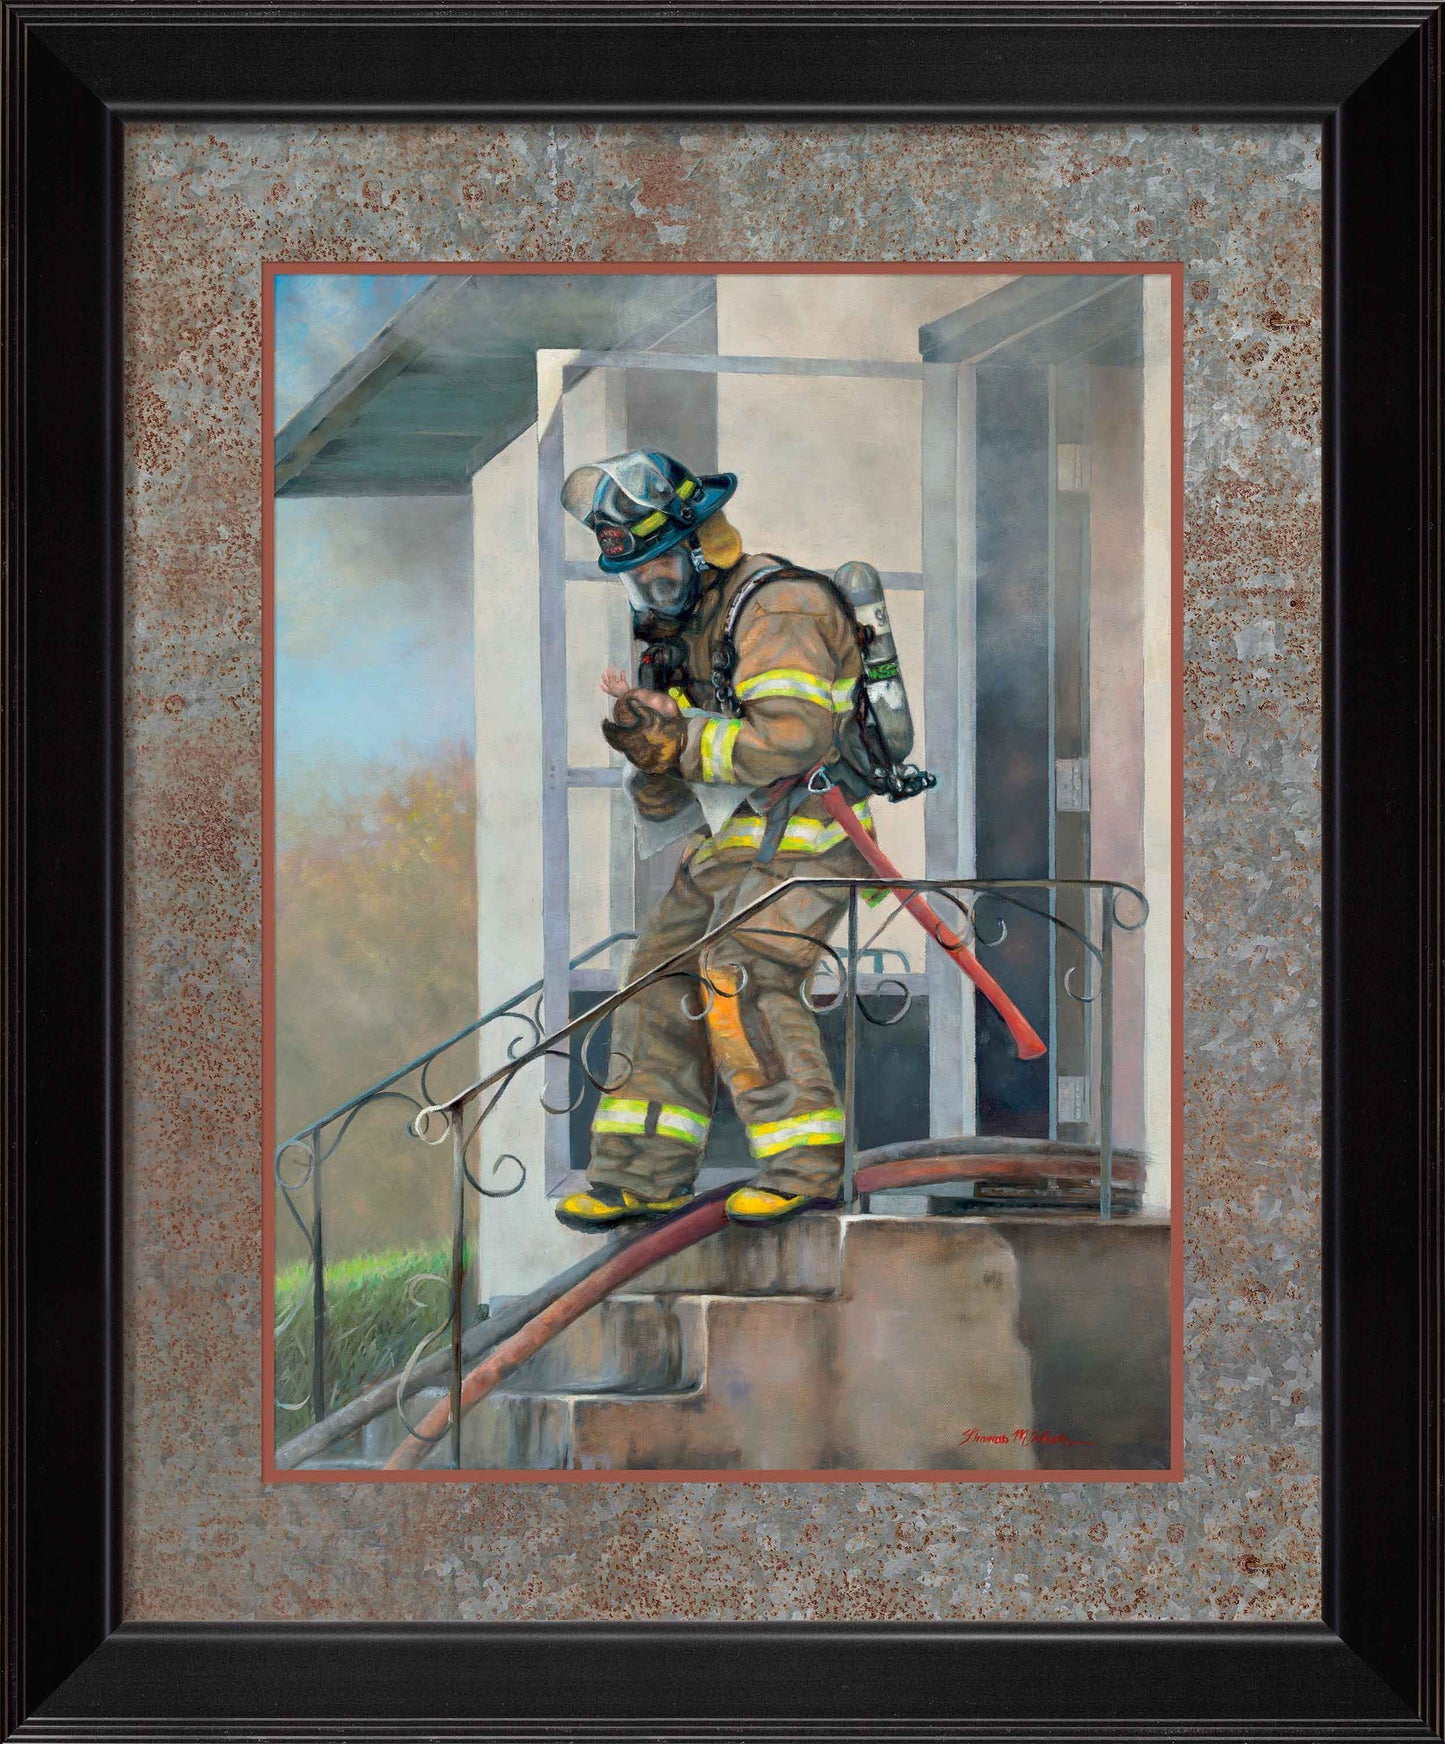 In Time—Firefighter and Baby